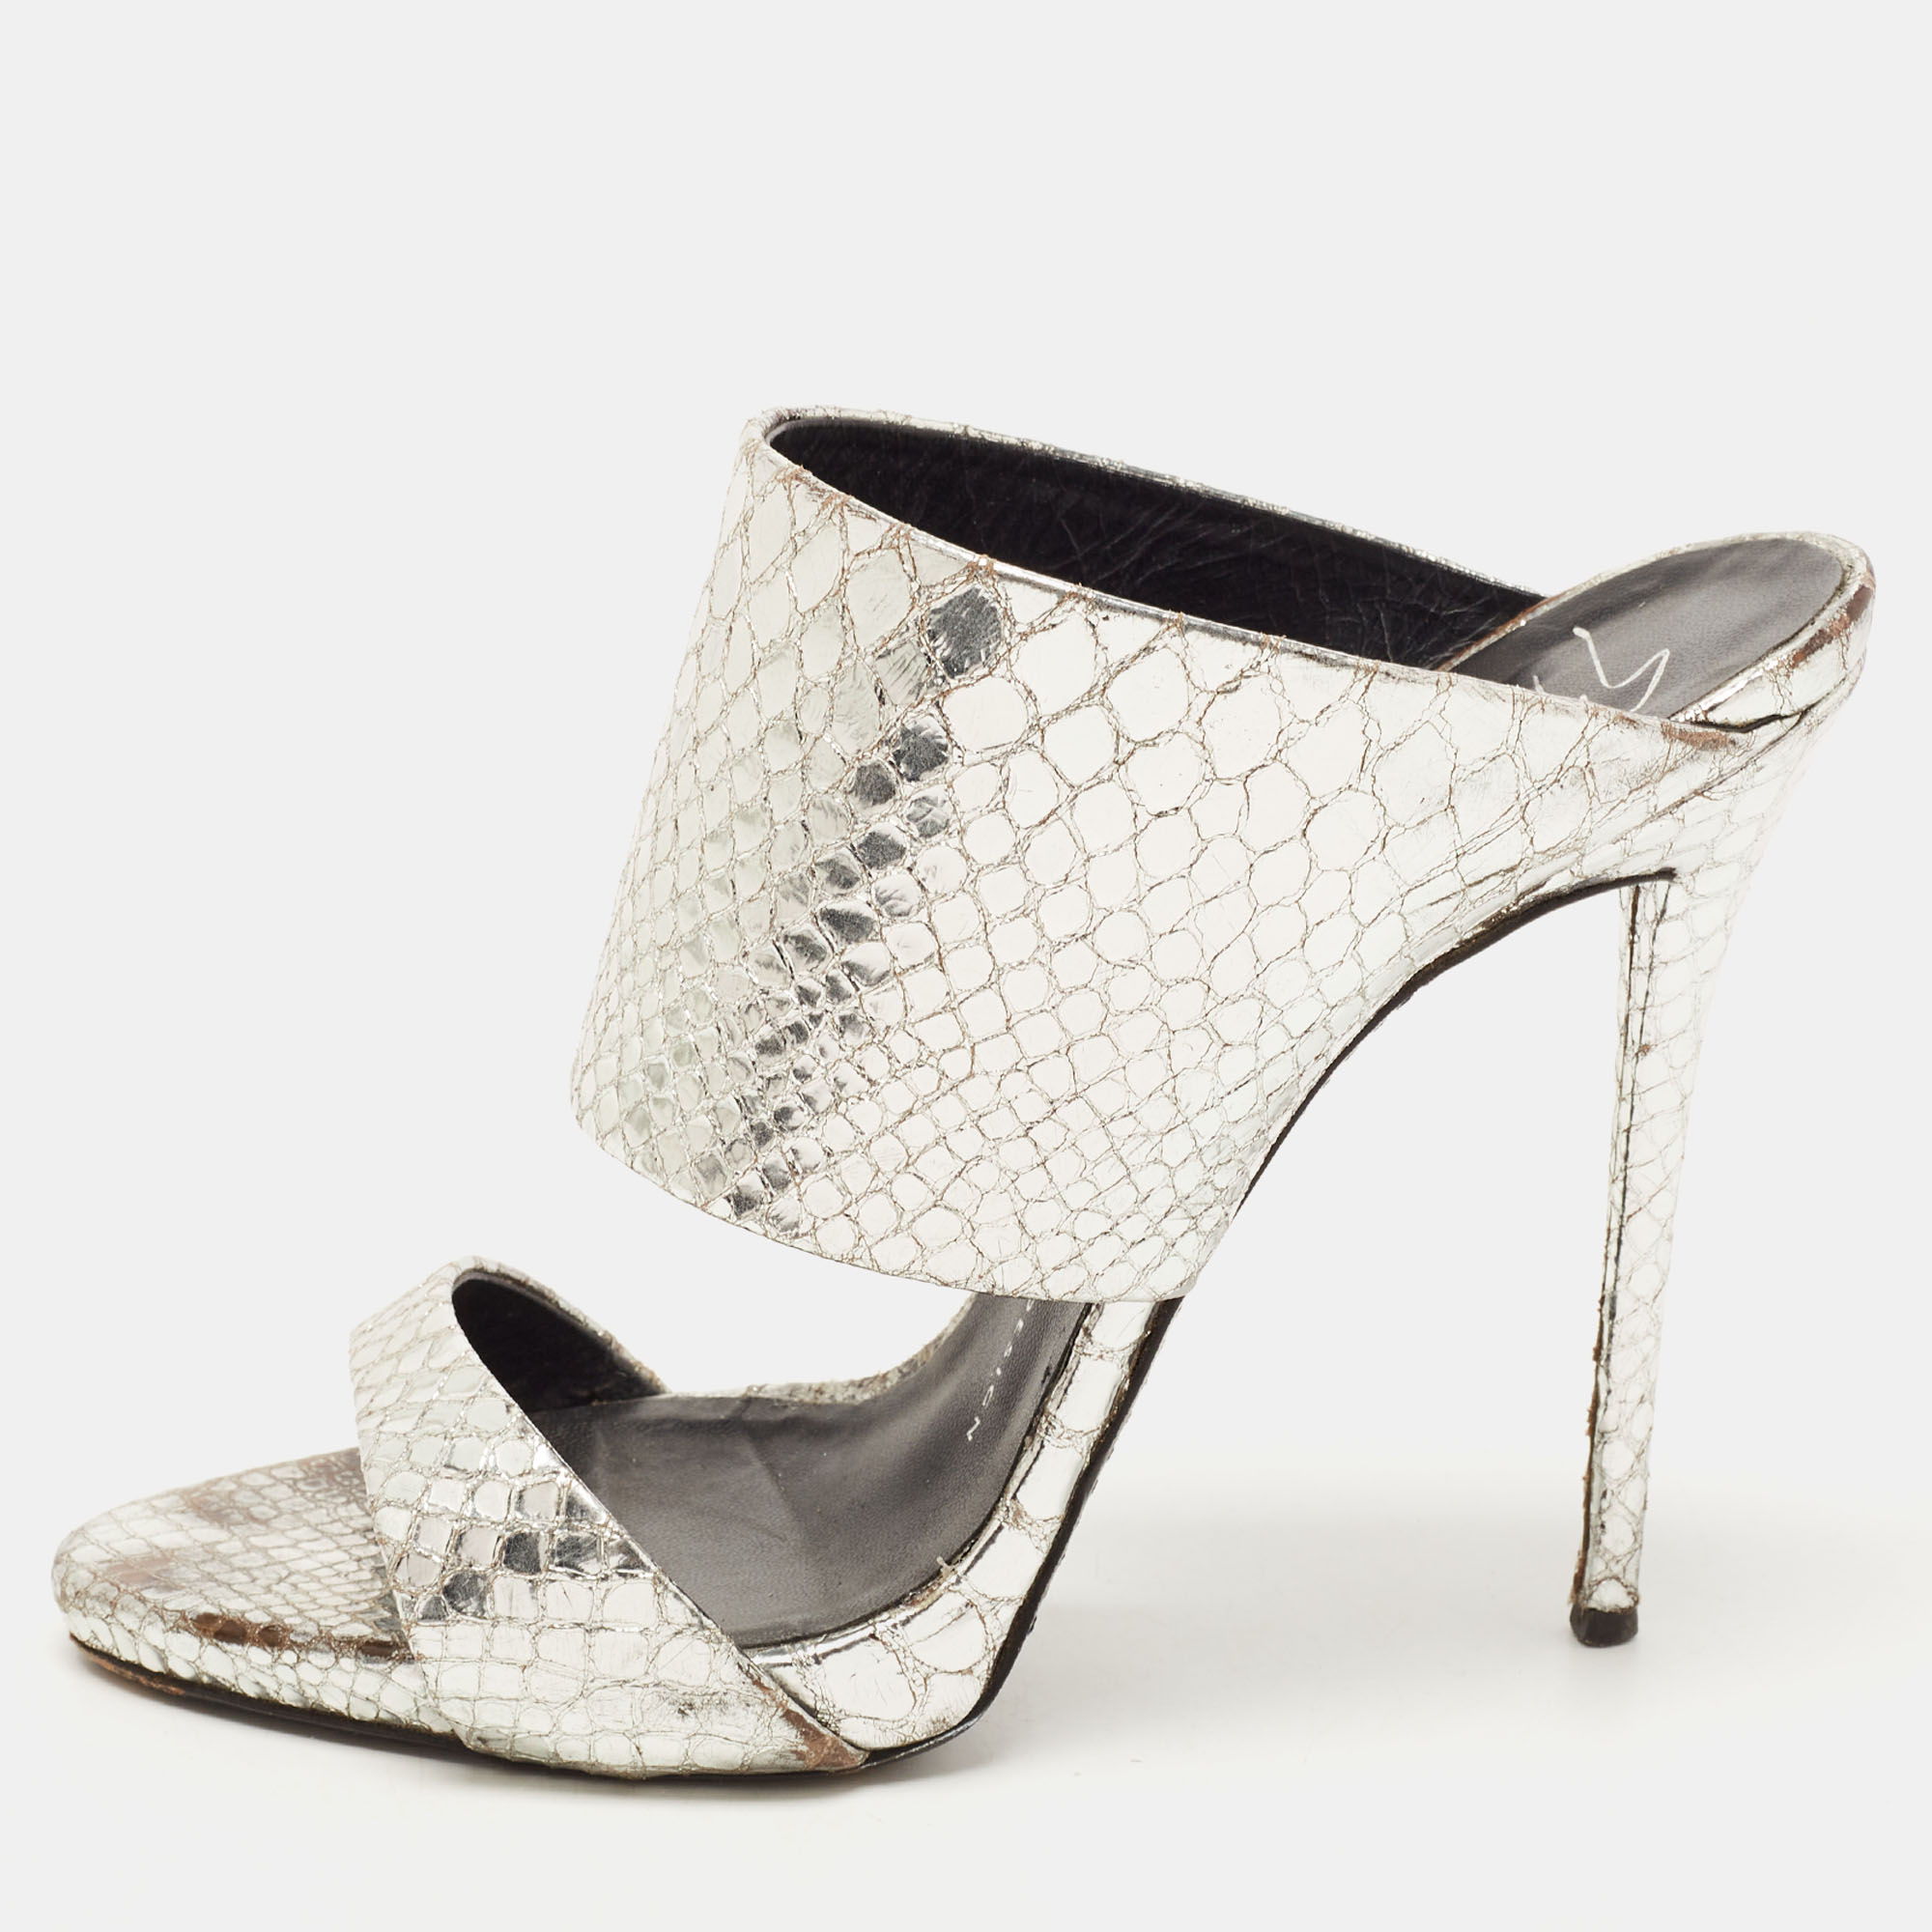 Pre-owned Giuseppe Zanotti Silver Python Embossed Leather Andrea Sandals Size 38.5